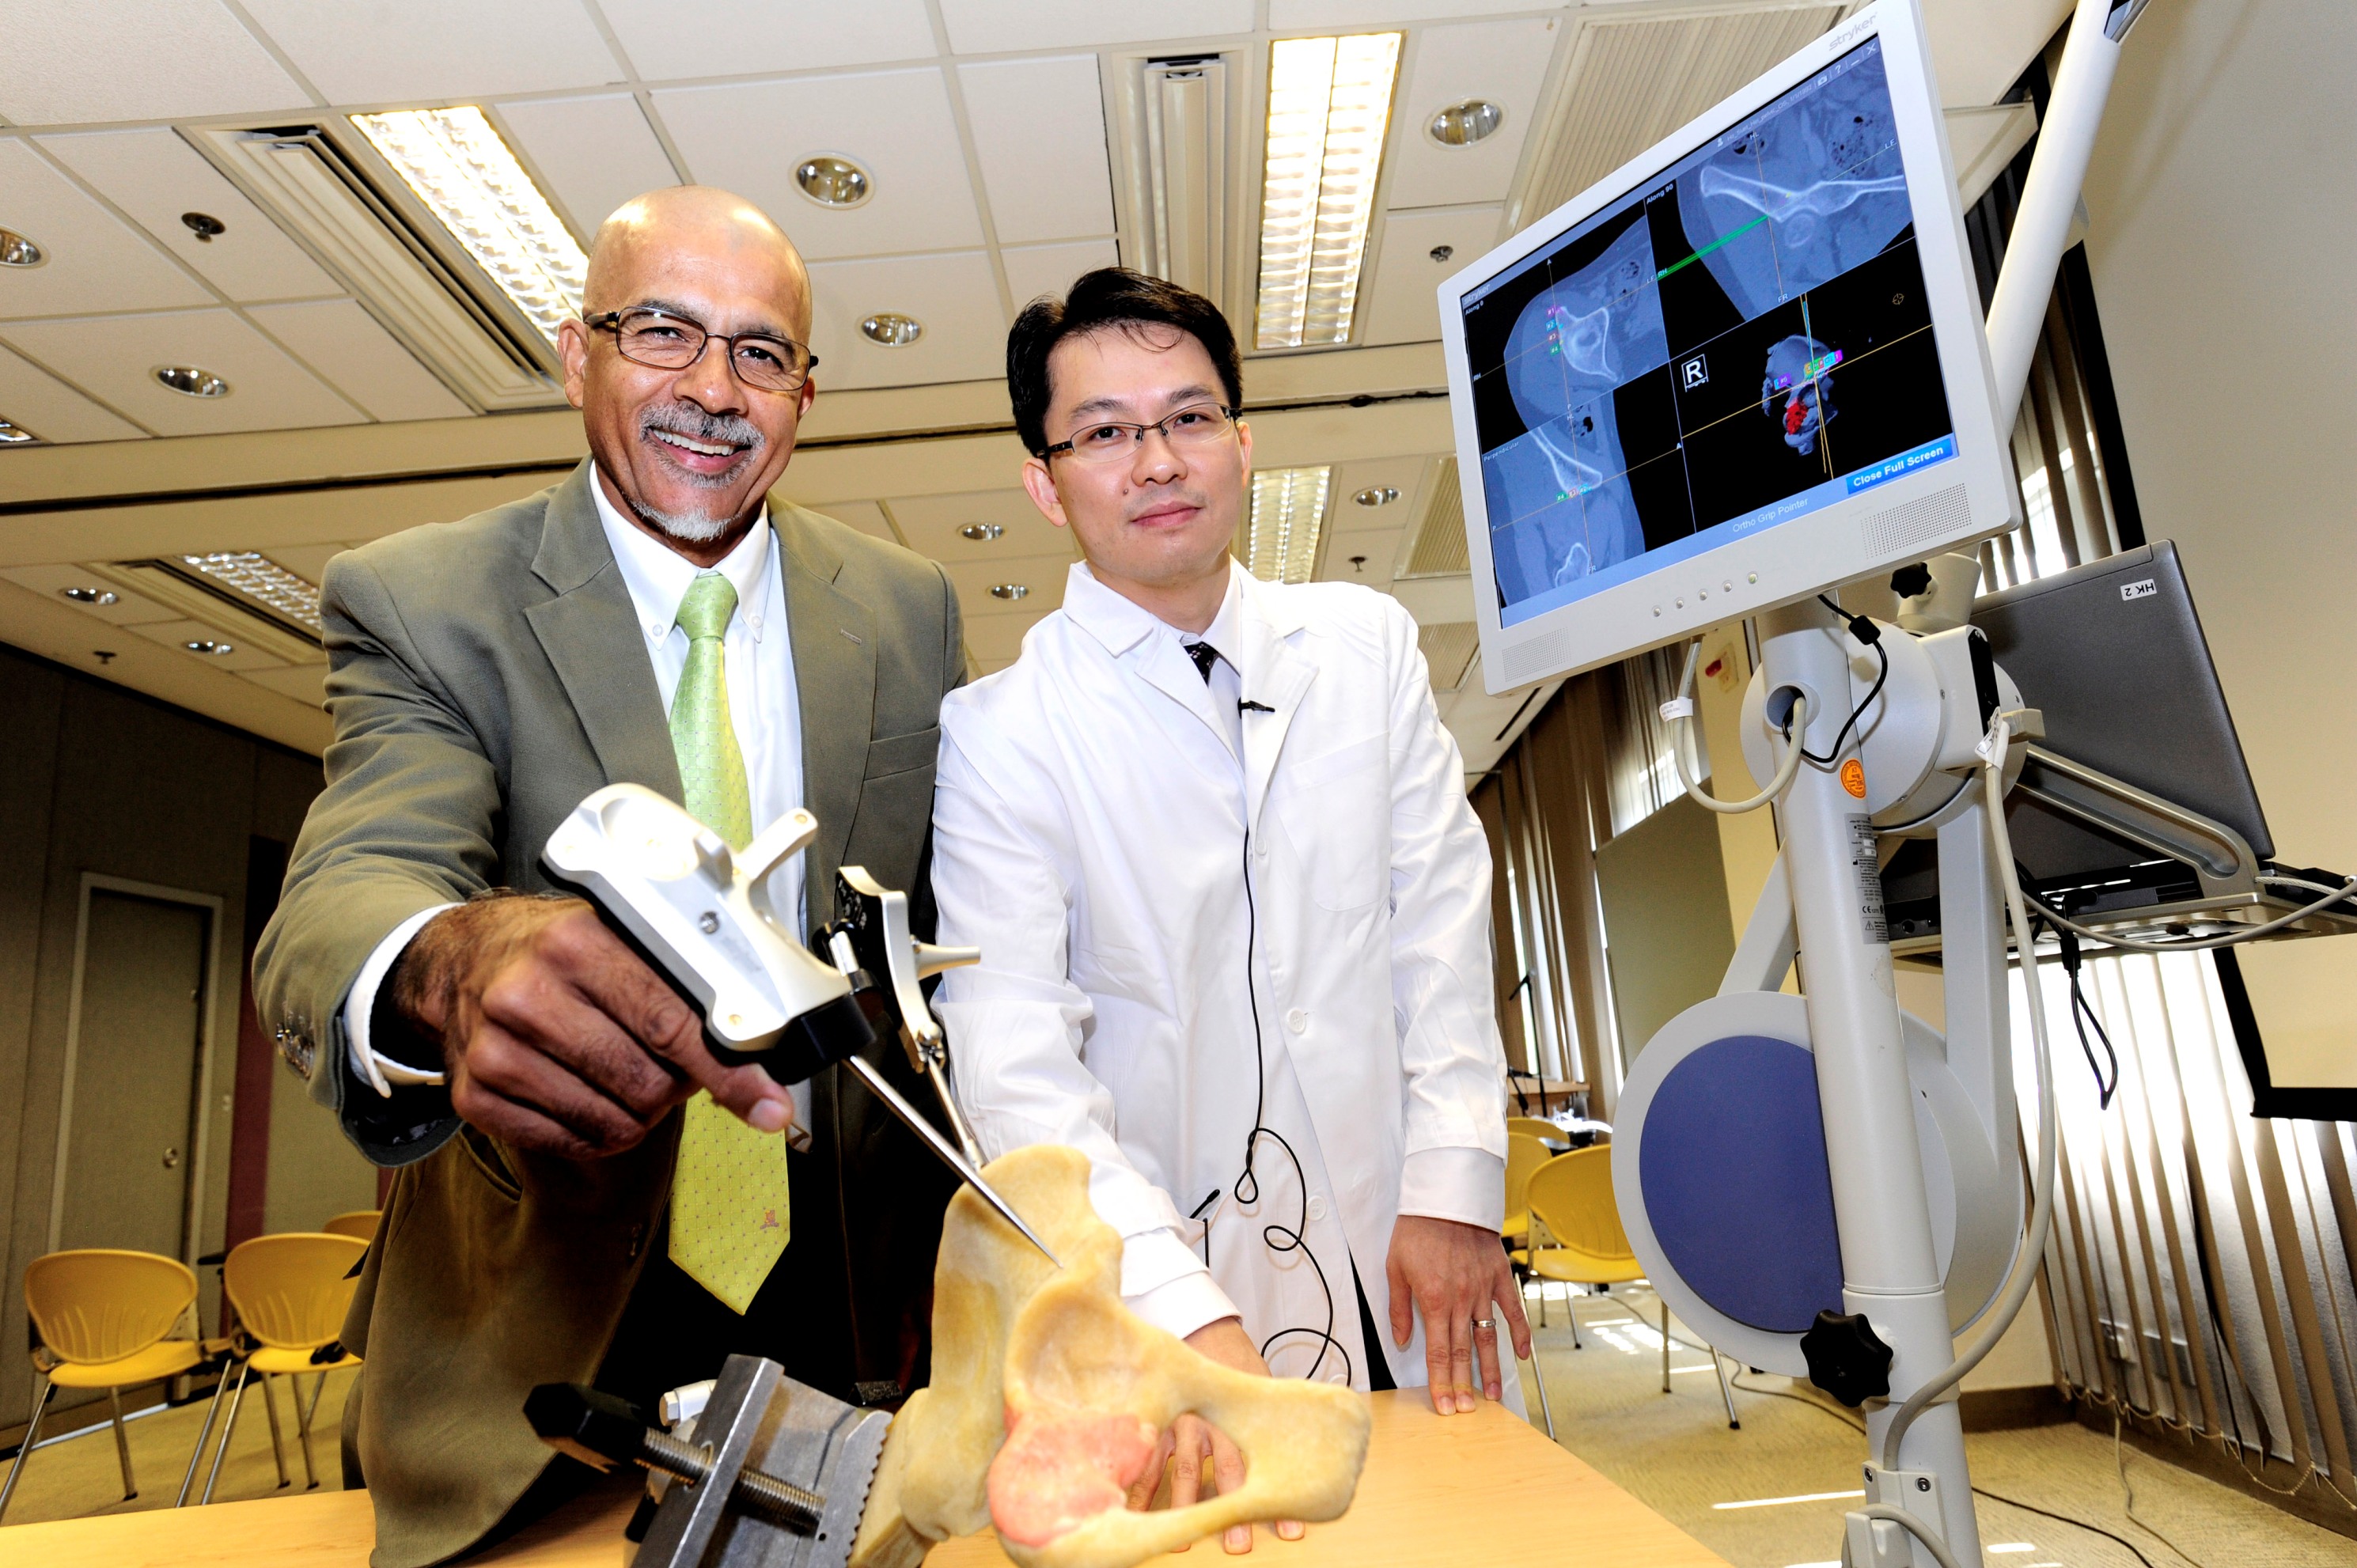 Professor Kumta (left) and Dr. Wong demonstrate the simulation of bone tumor removal surgery.